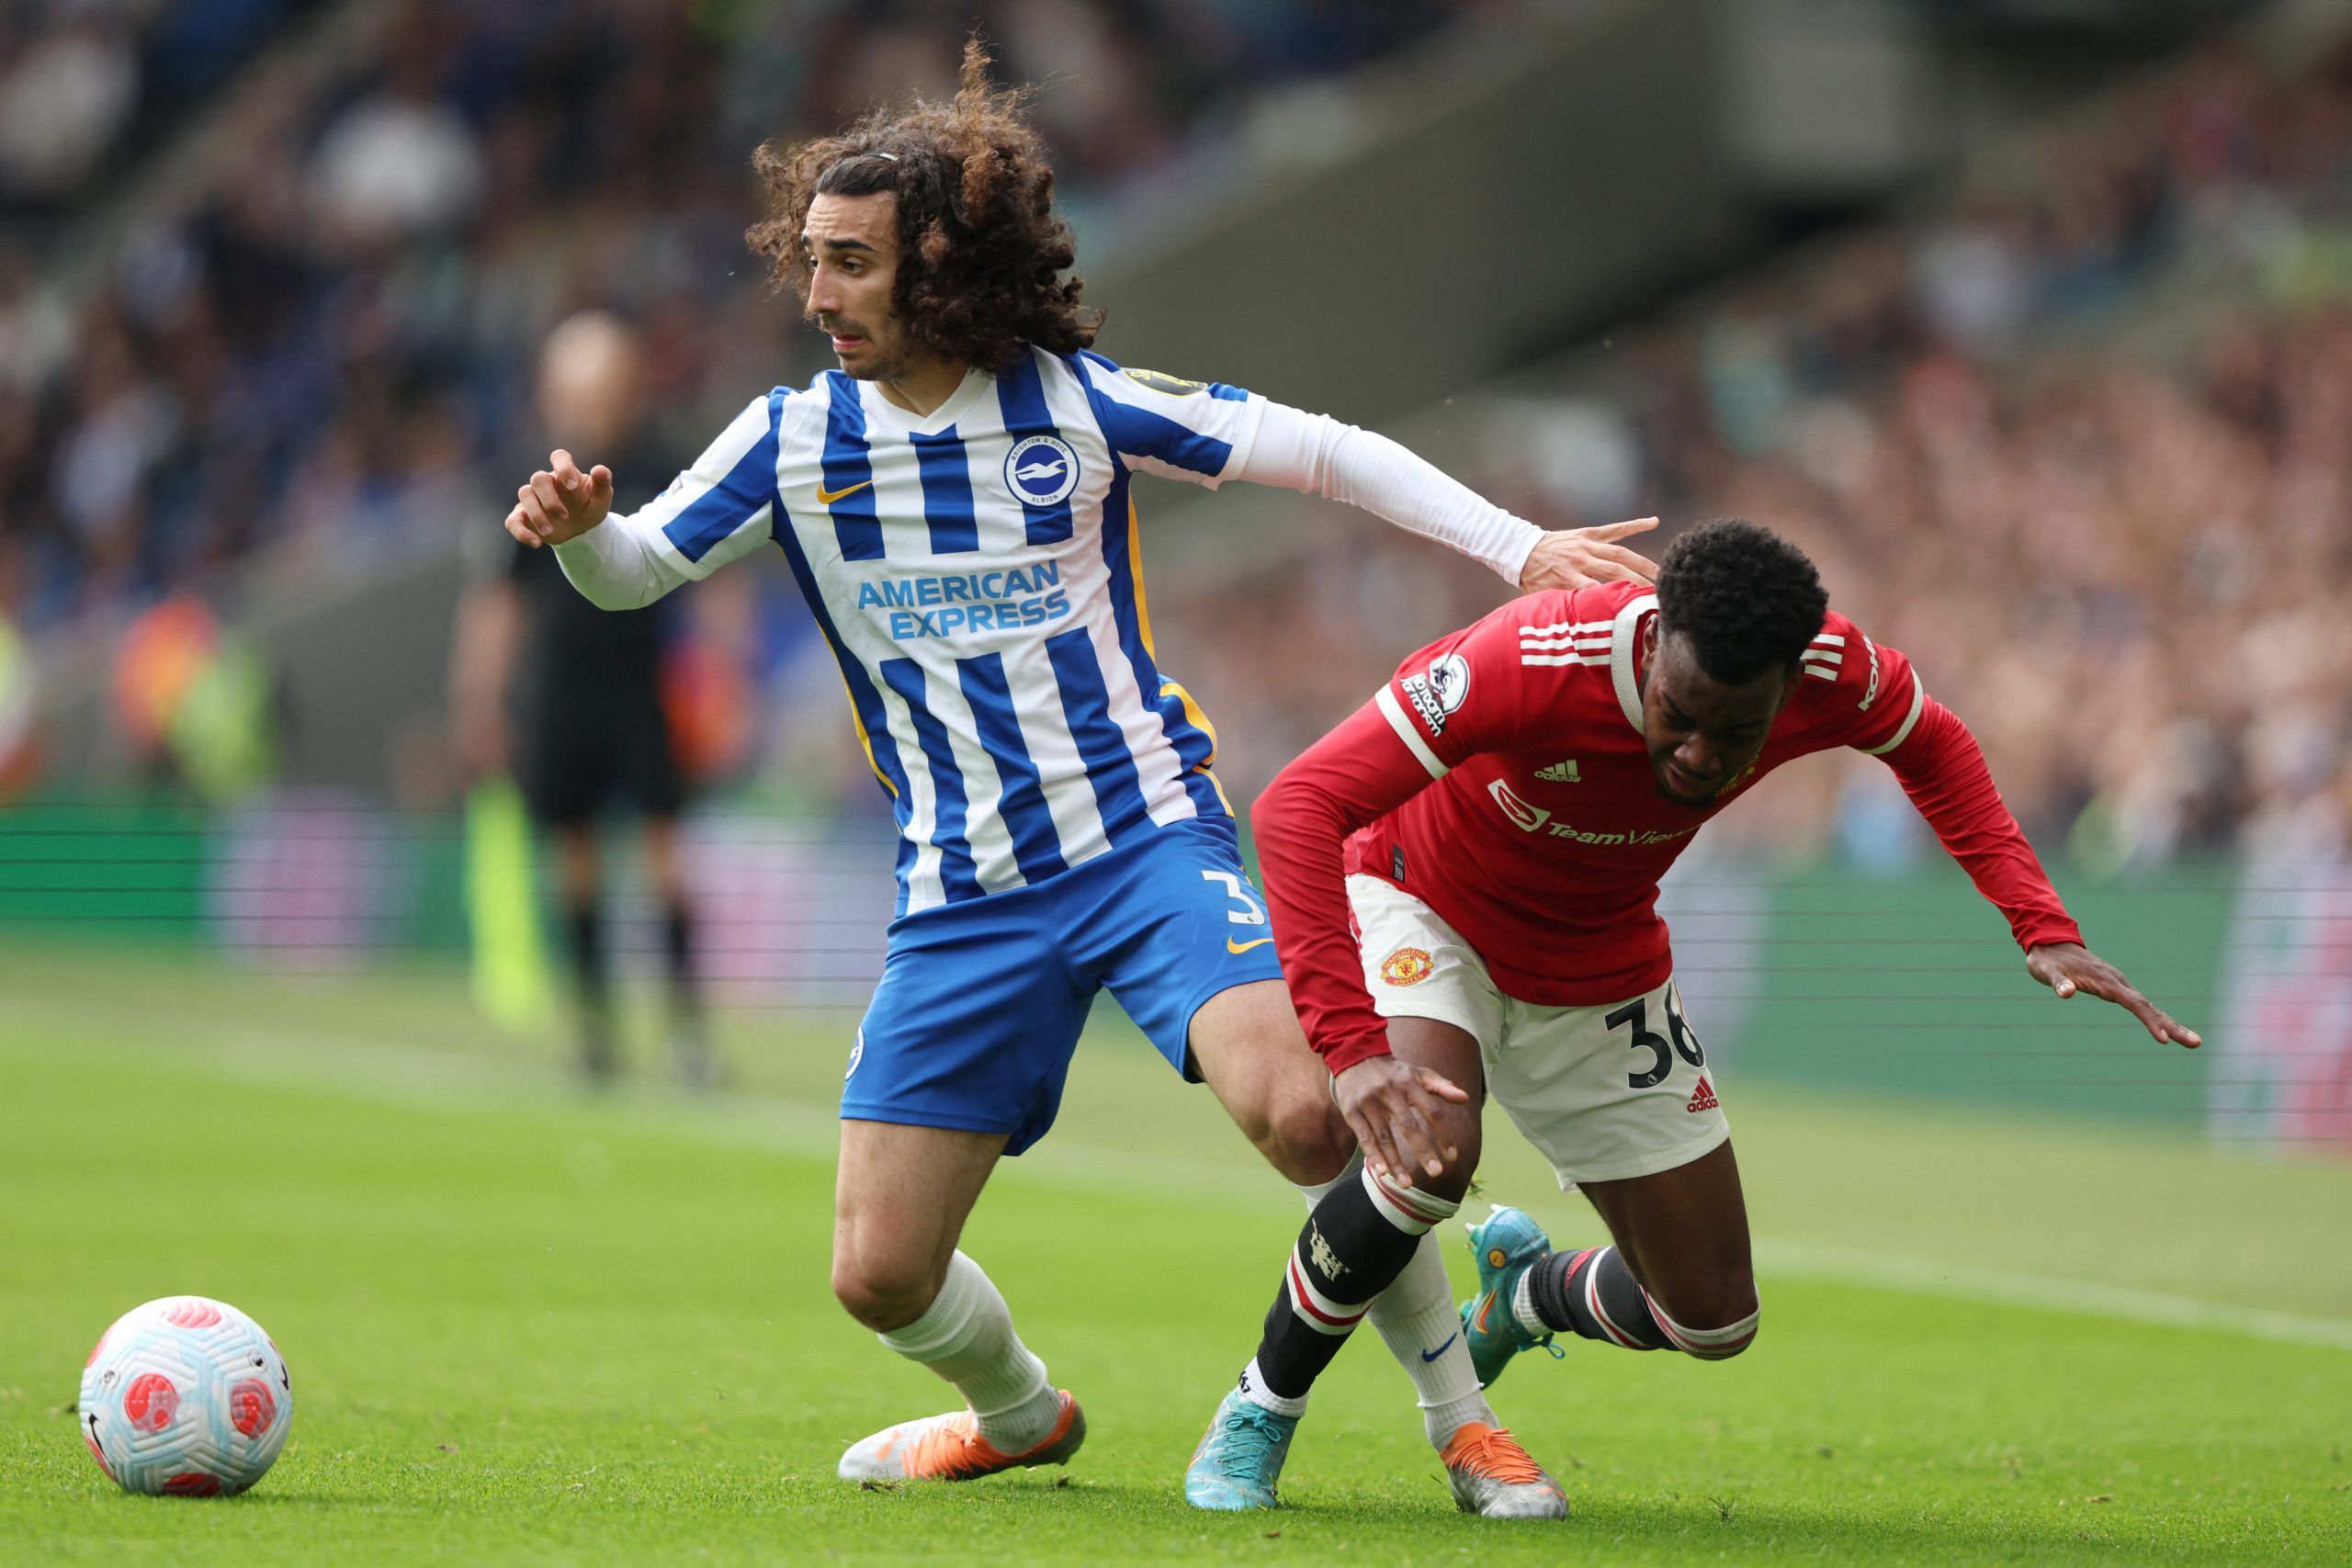 marc-cucurella-brighton-and-hove-albion-manchester-city-pep-guardiola-etihad-stadium-man-city-transfer-newsSoccer Football - Premier League - Brighton &amp; Hove Albion v Manchester United - The American Express Community Stadium, Brighton, Britain - May 7, 2022 Brighton &amp; Hove Albion's Marc Cucurella in action with Manchester United's Anthony Elanga REUTERS/Ian Walton EDITORIAL USE ONLY. No use with unauthorized audio, video, data, fixture lists, club/league logos or 'live' services. Online